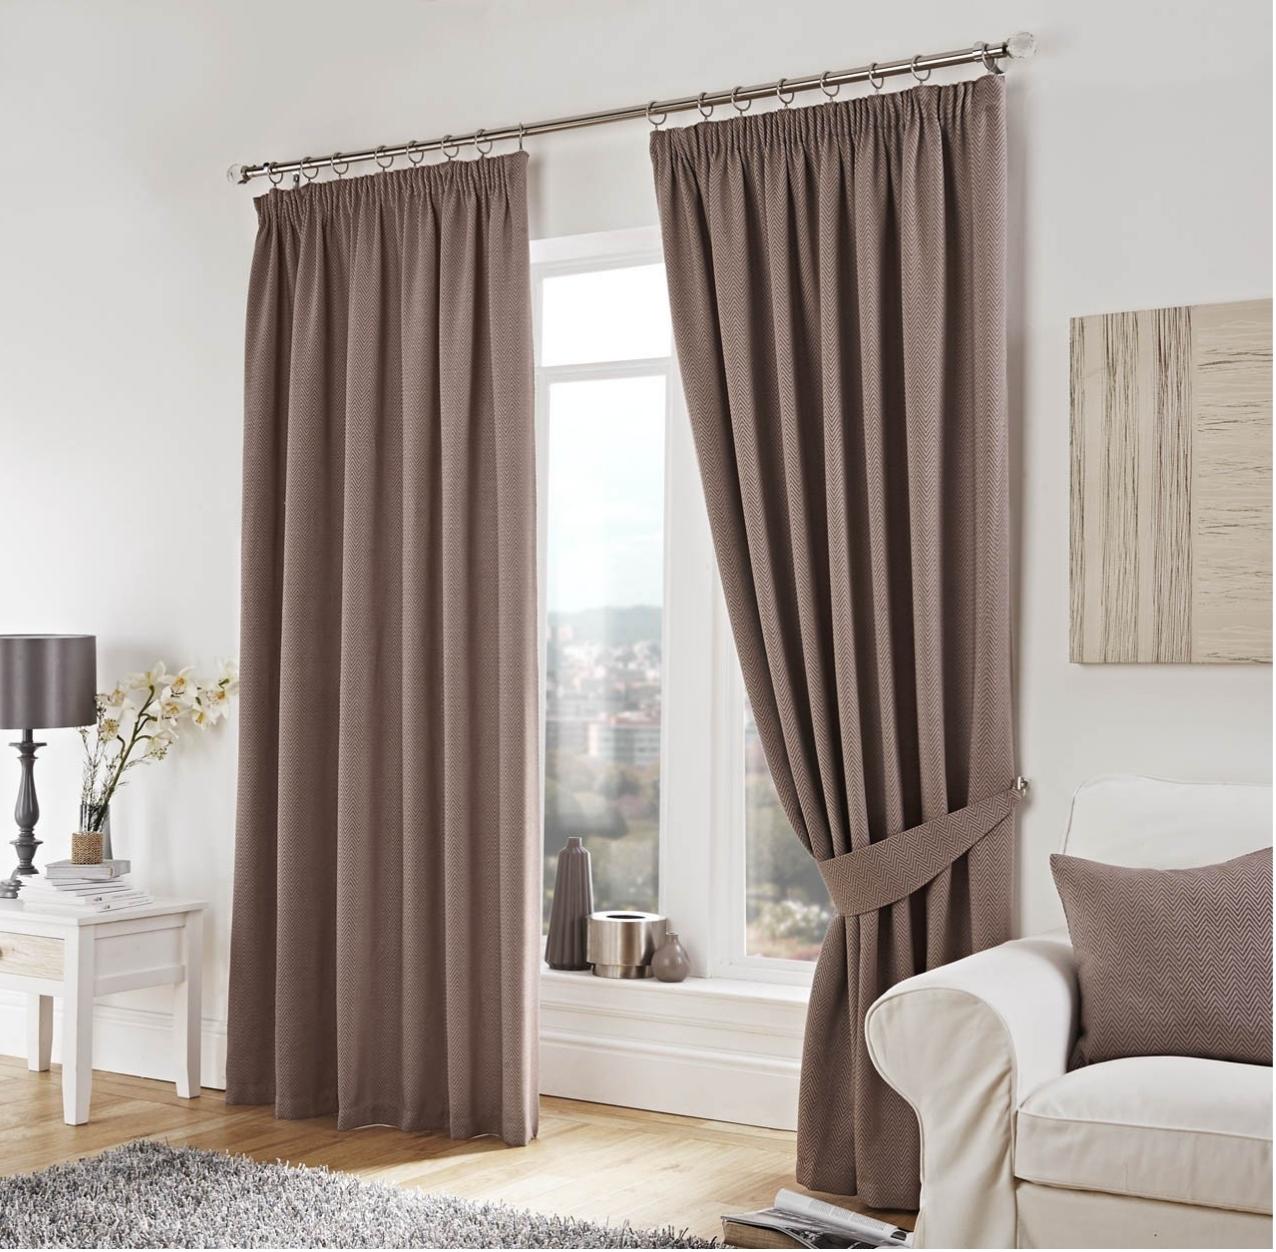 How Do You Pick the Best Curtains for Your House?